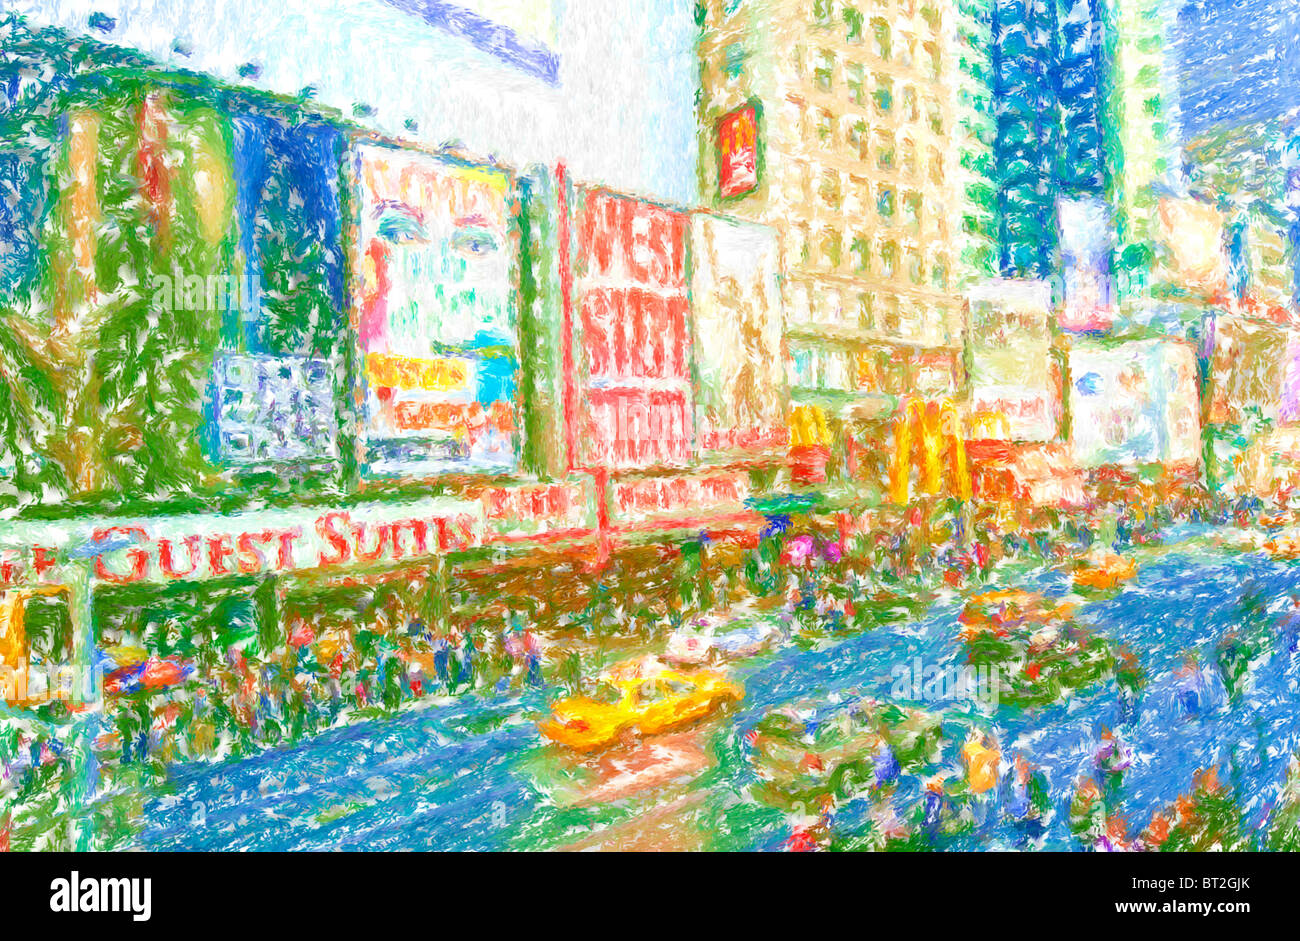 Times Square, New York City impressionist style painting Stock Photo